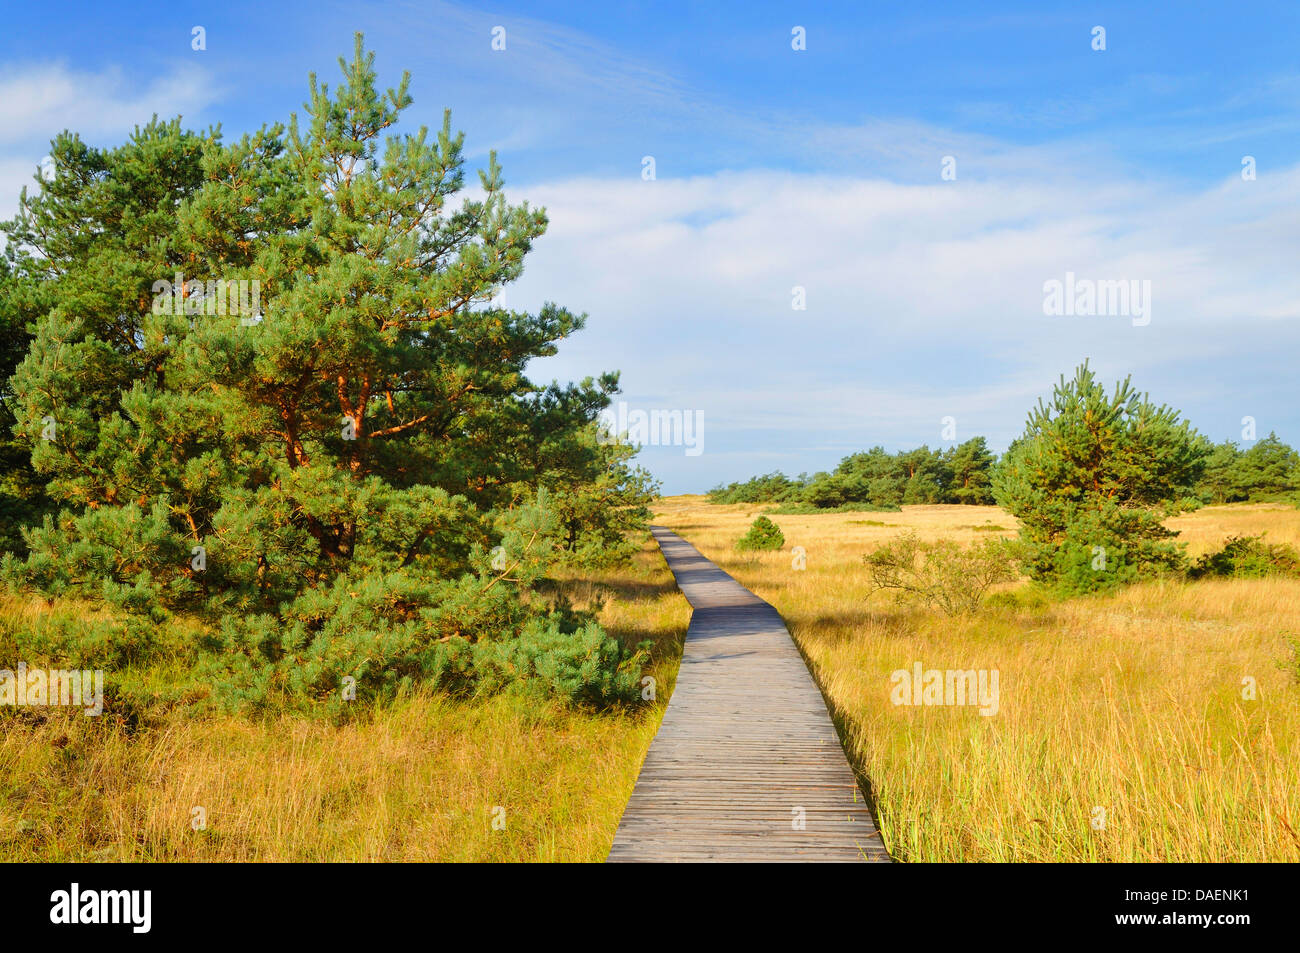 planked footpath through a grassgrown dunelandscape with pines, Germany, Mecklenburg-Western Pomerania, Western Pomerania Lagoon Area National Park Stock Photo